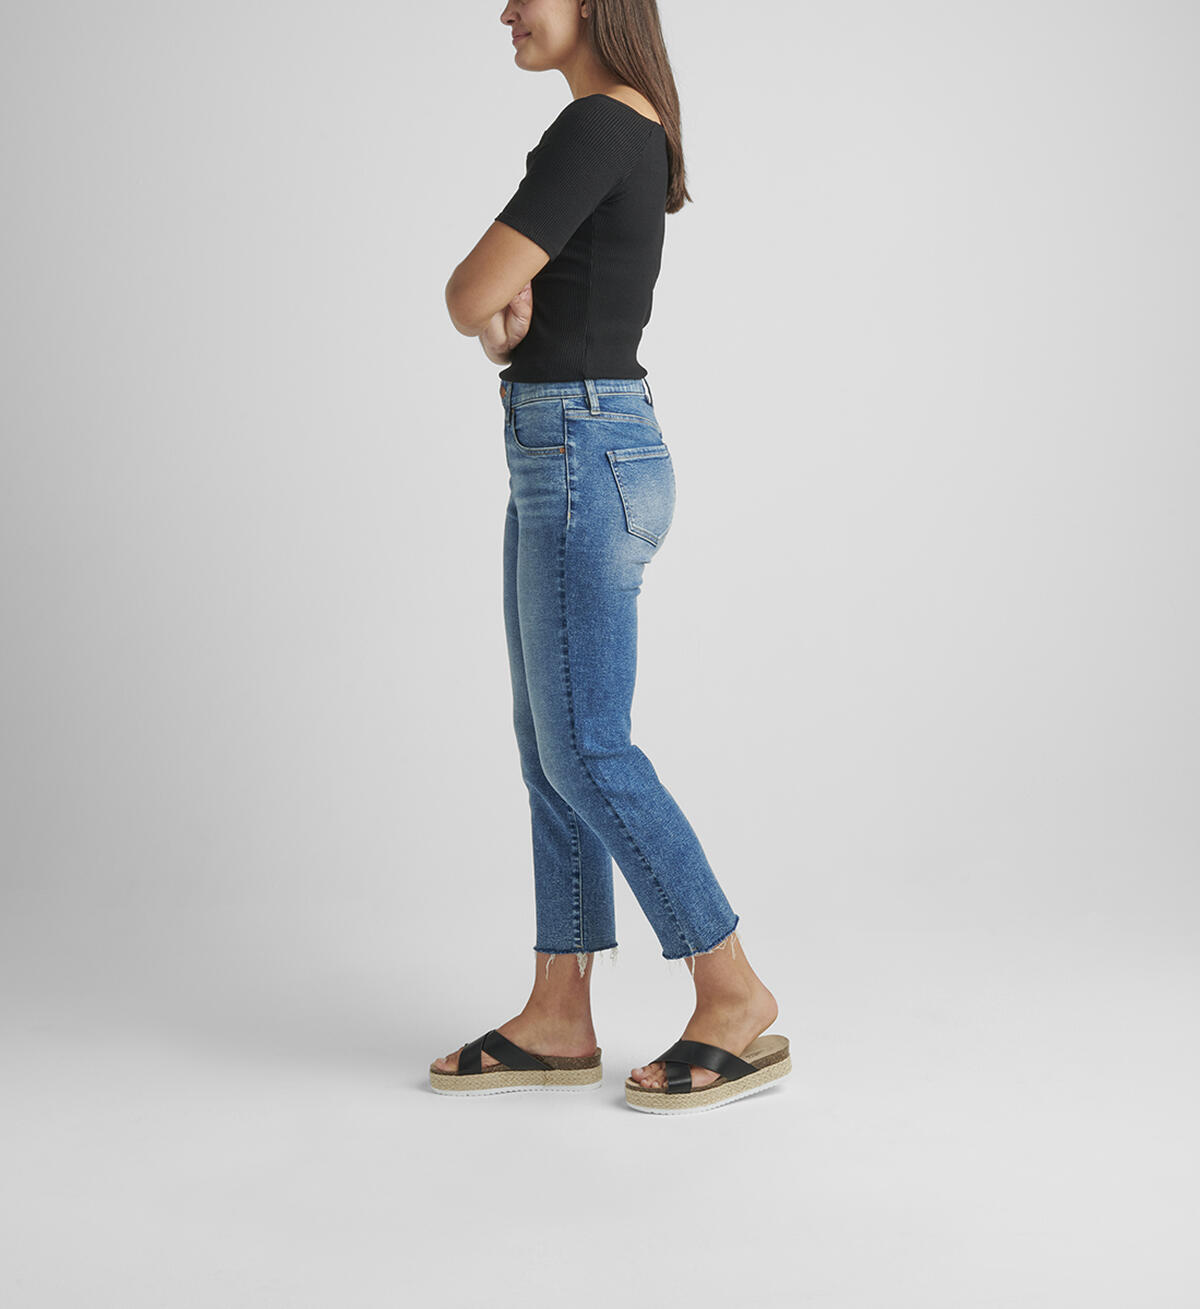 Valentina High Rise Straight Crop Pull-On Jeans, , hi-res image number 2